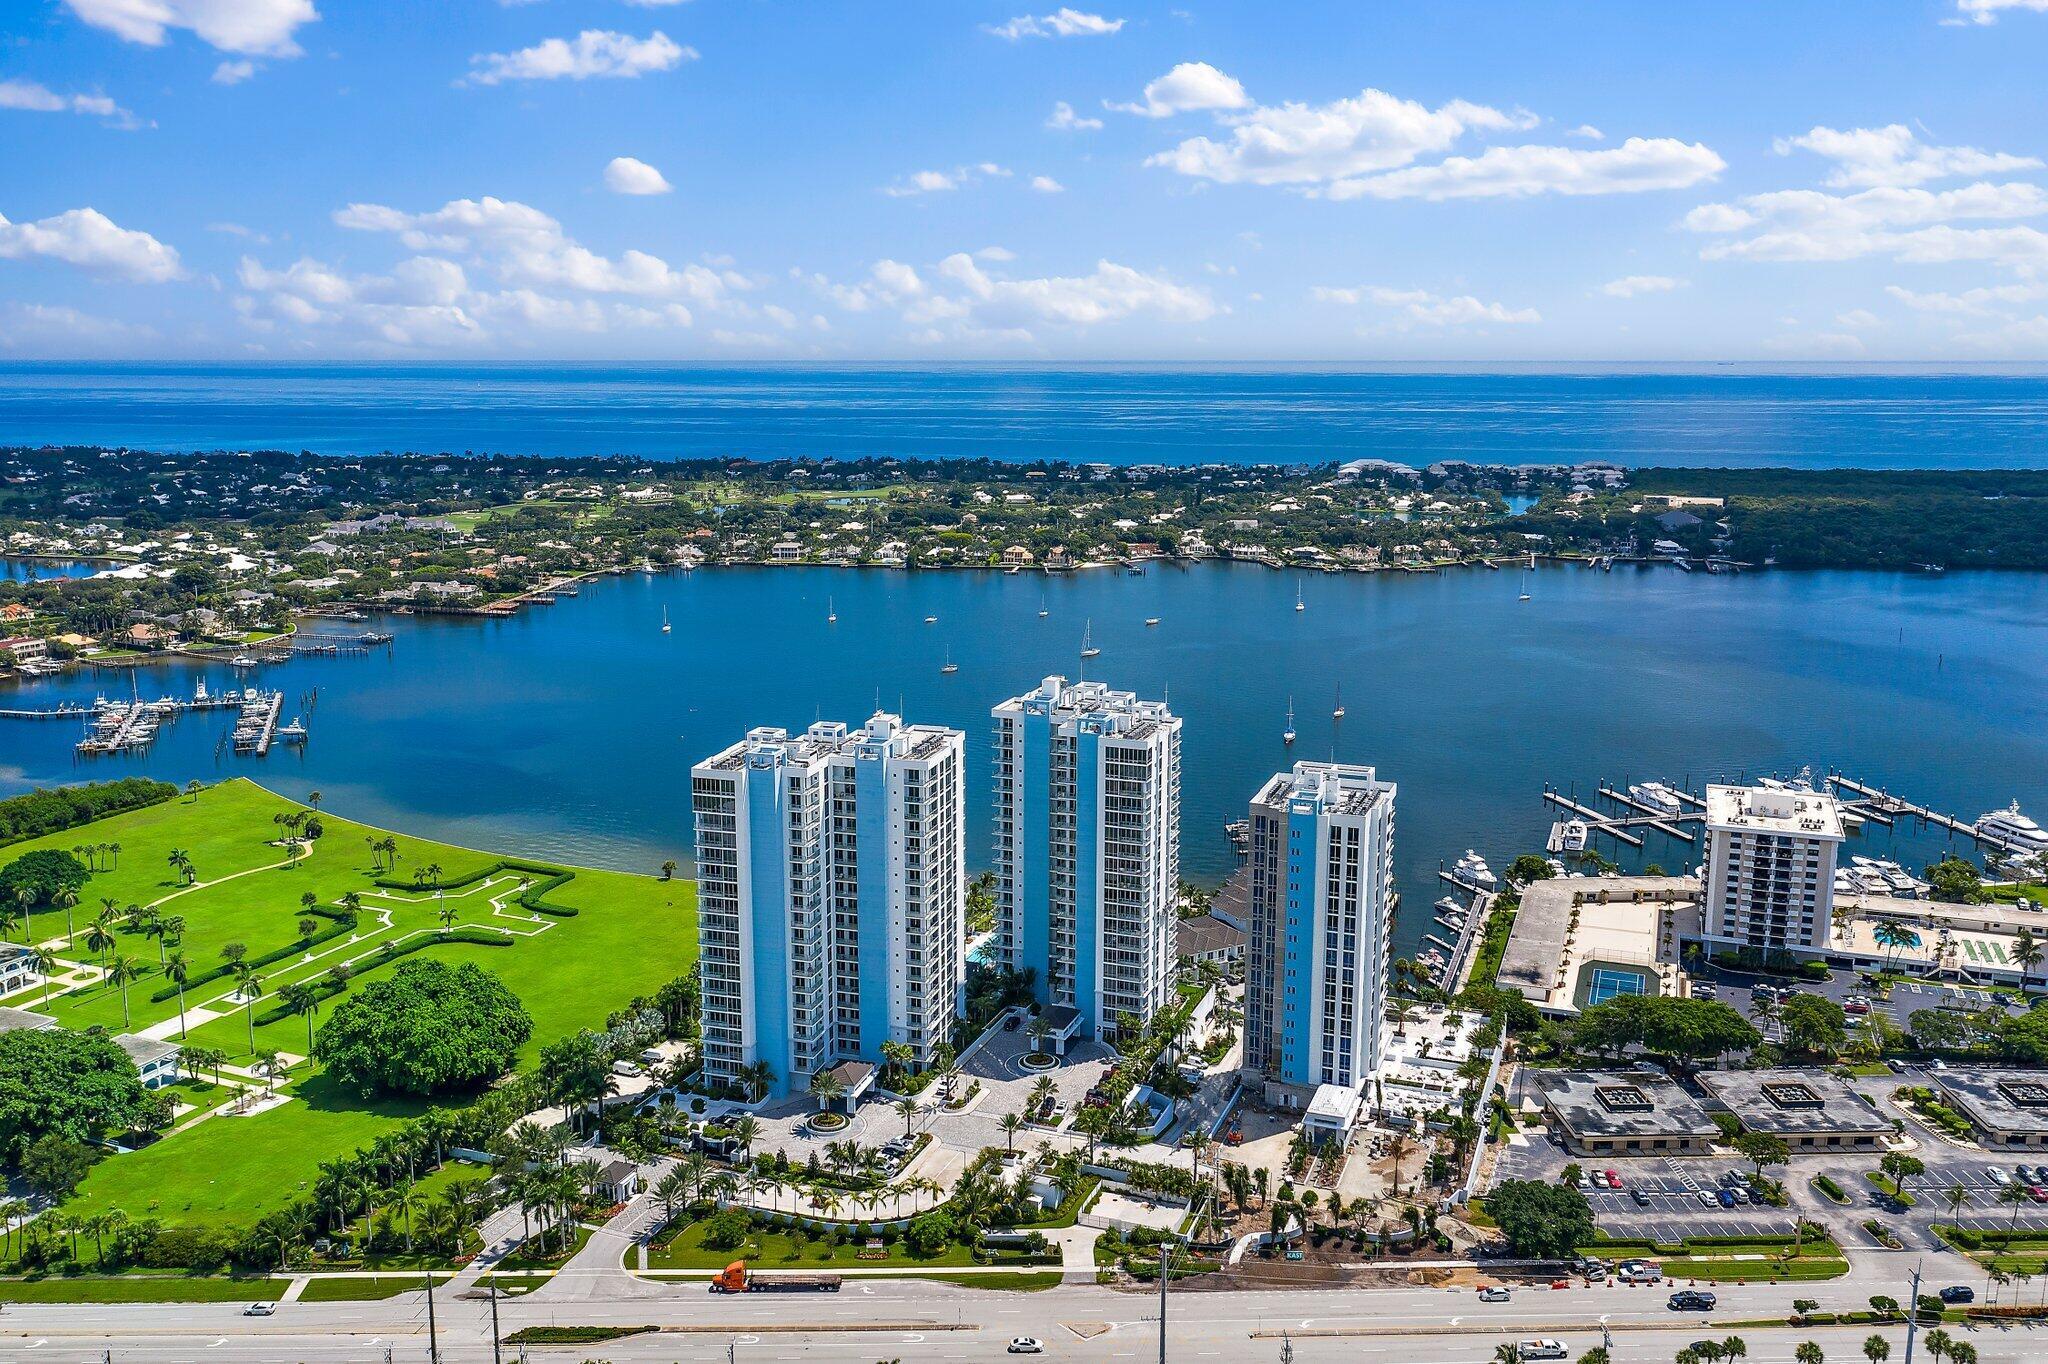 Indulge in the epitome of waterfront luxury living with this rare opportunity to own one of the largest units in The Water Club. Prepare to be mesmerized by the breathtaking vistas of the Intracoastal, Atlantic Ocean, and city skyline that unfold before you from every angle..With a total of 4 generously sized bedrooms plus an office/den, along with 4 baths and a powder room, there's no shortage of space for both relaxation and productivity. Whether you're unwinding in the lavish master suite, hosting soirees in the expansive living areas, or taking in the panoramic views from your private balcony, every moment spent in this luxurious sanctuary is sure to be nothing short of extraordinary.